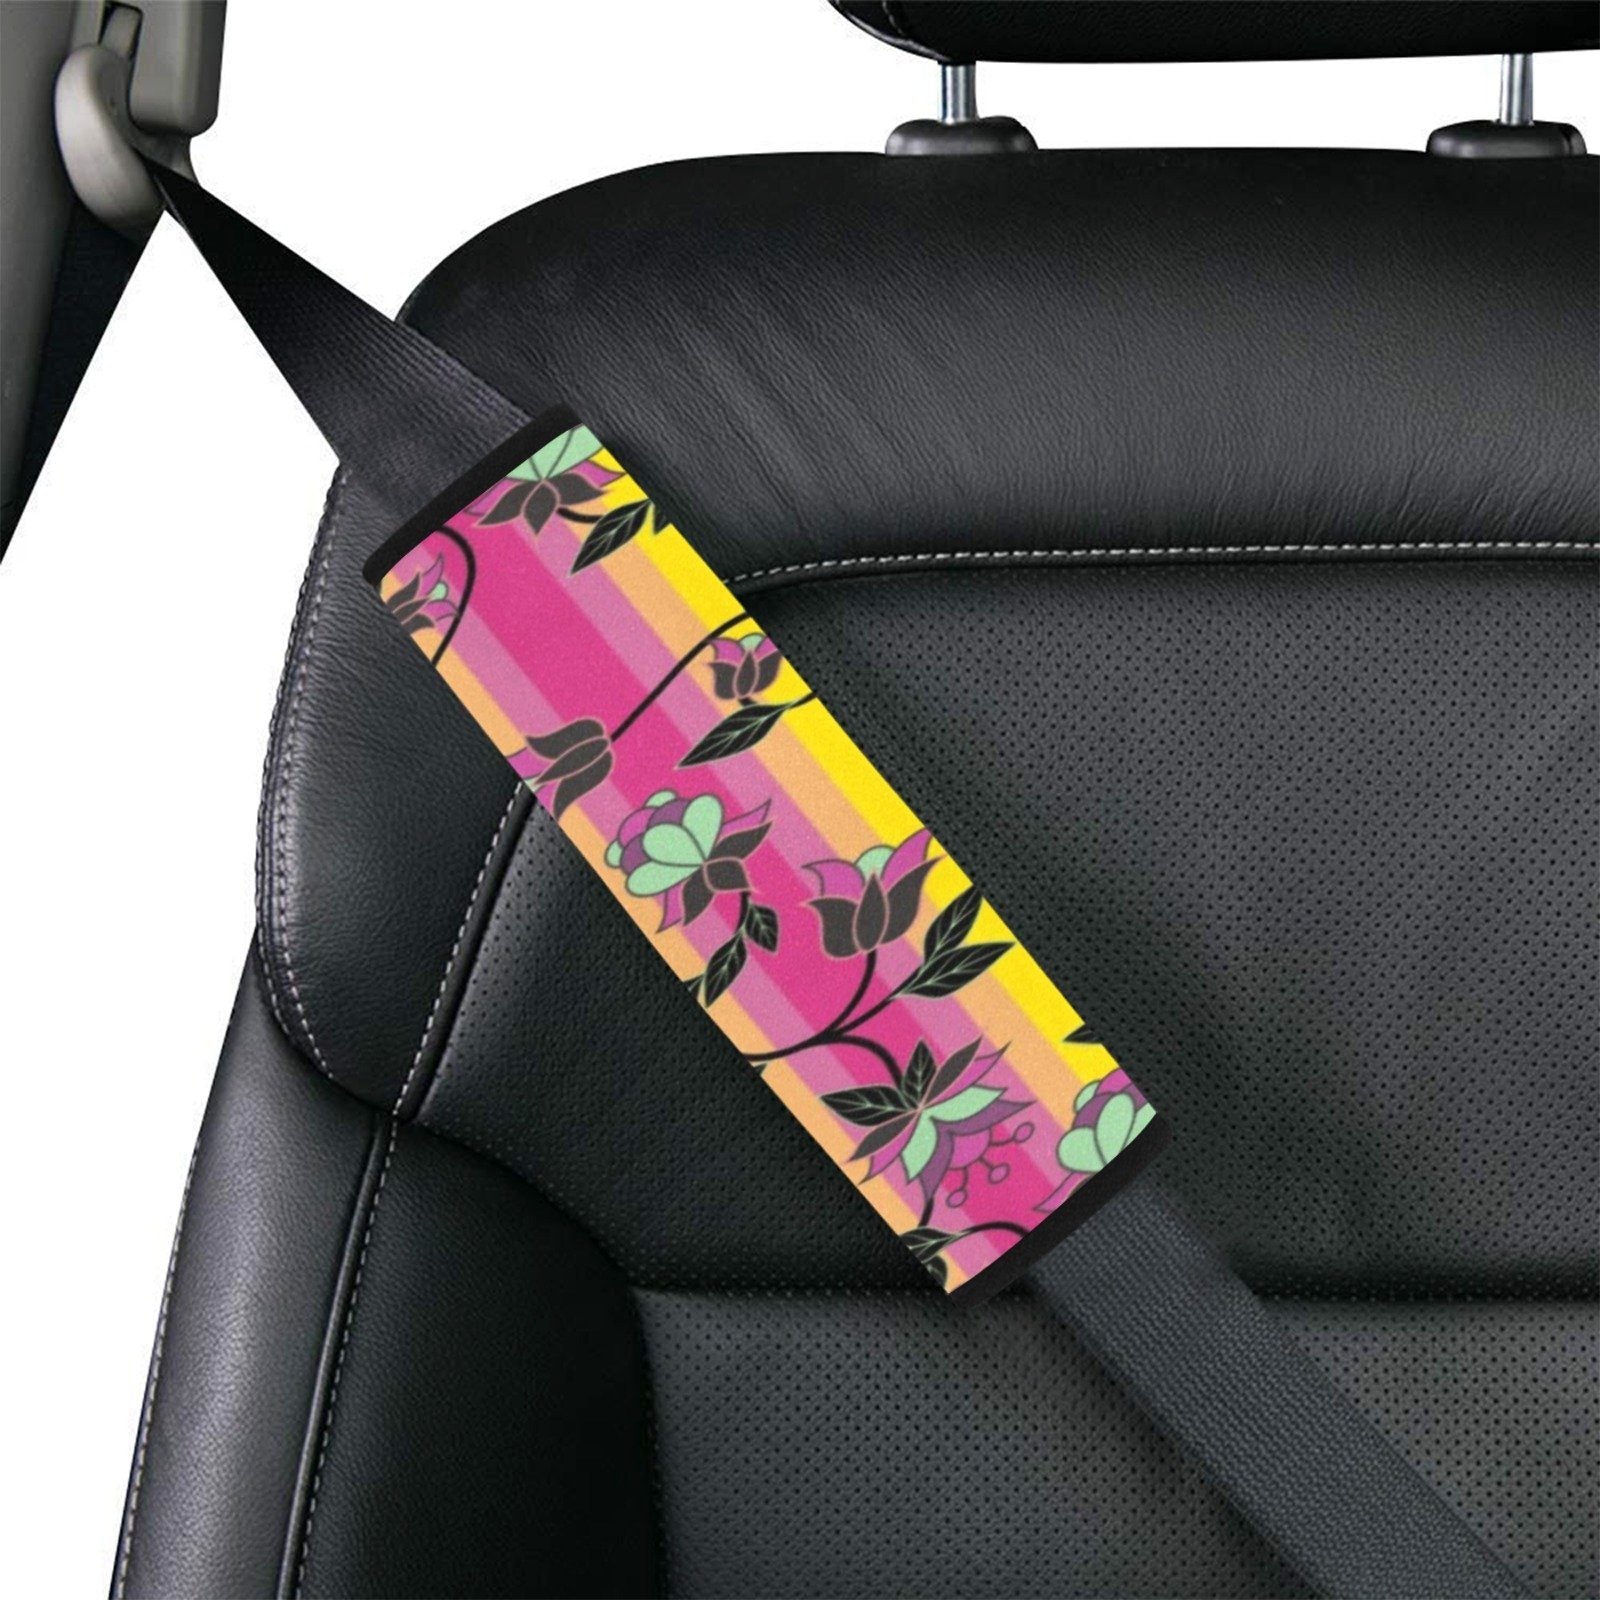 Powwow Carnival Car Seat Belt Cover 7''x12.6'' (Pack of 2) Car Seat Belt Cover 7x12.6 (Pack of 2) e-joyer 